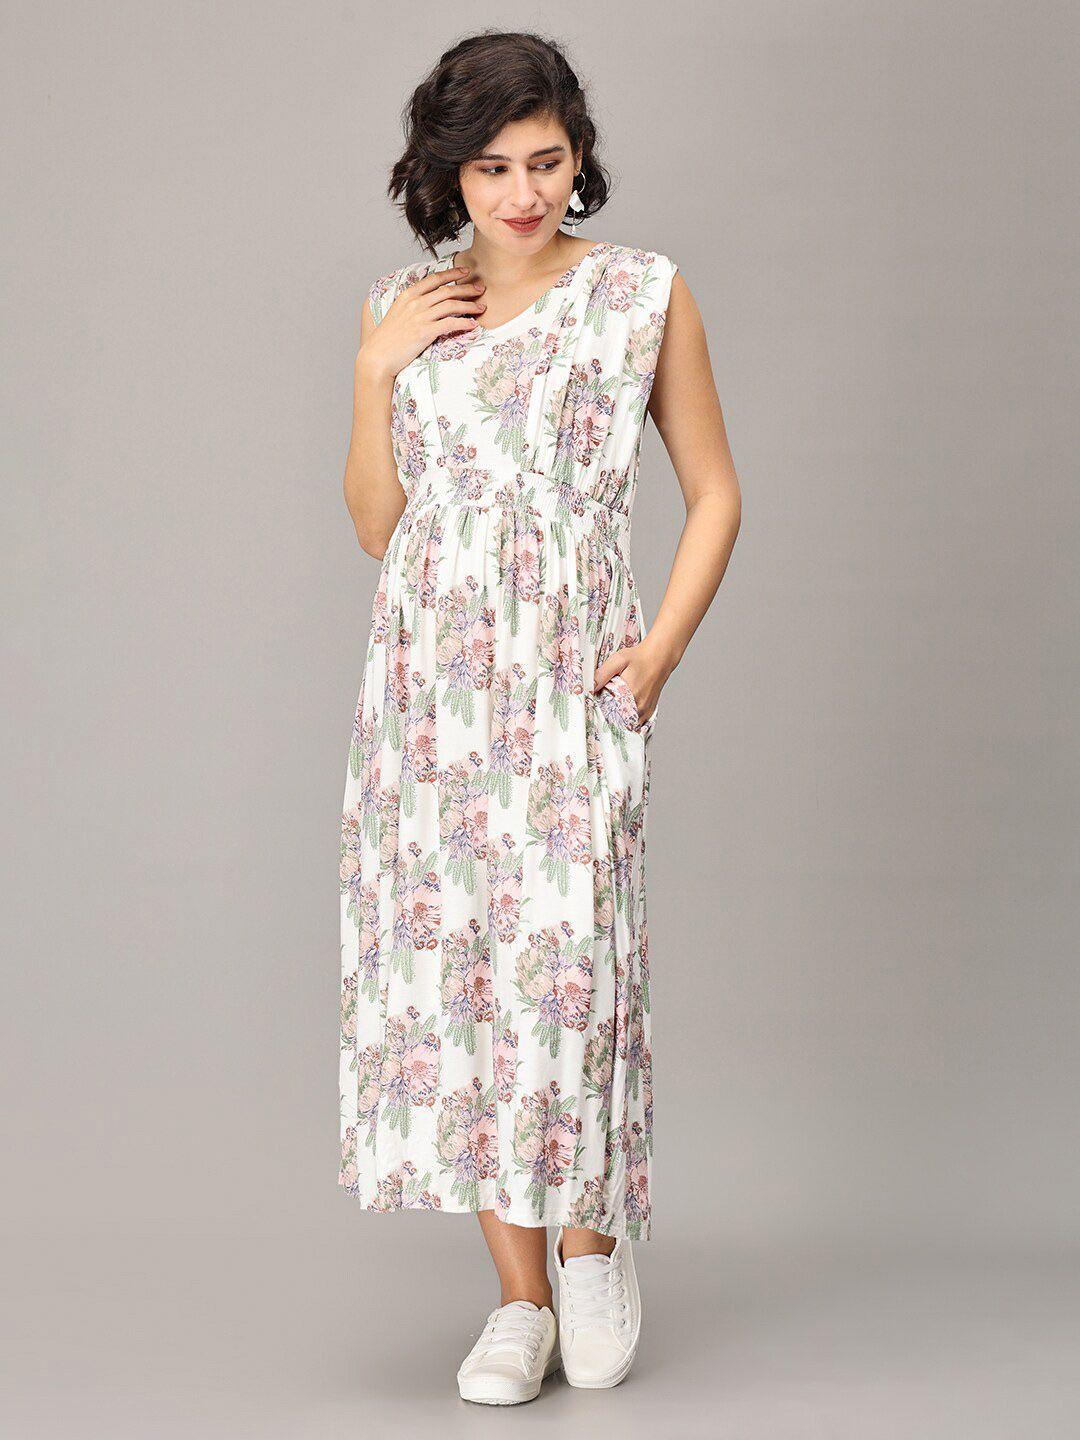 the-mom-store-white-floral-print-maxi-dress